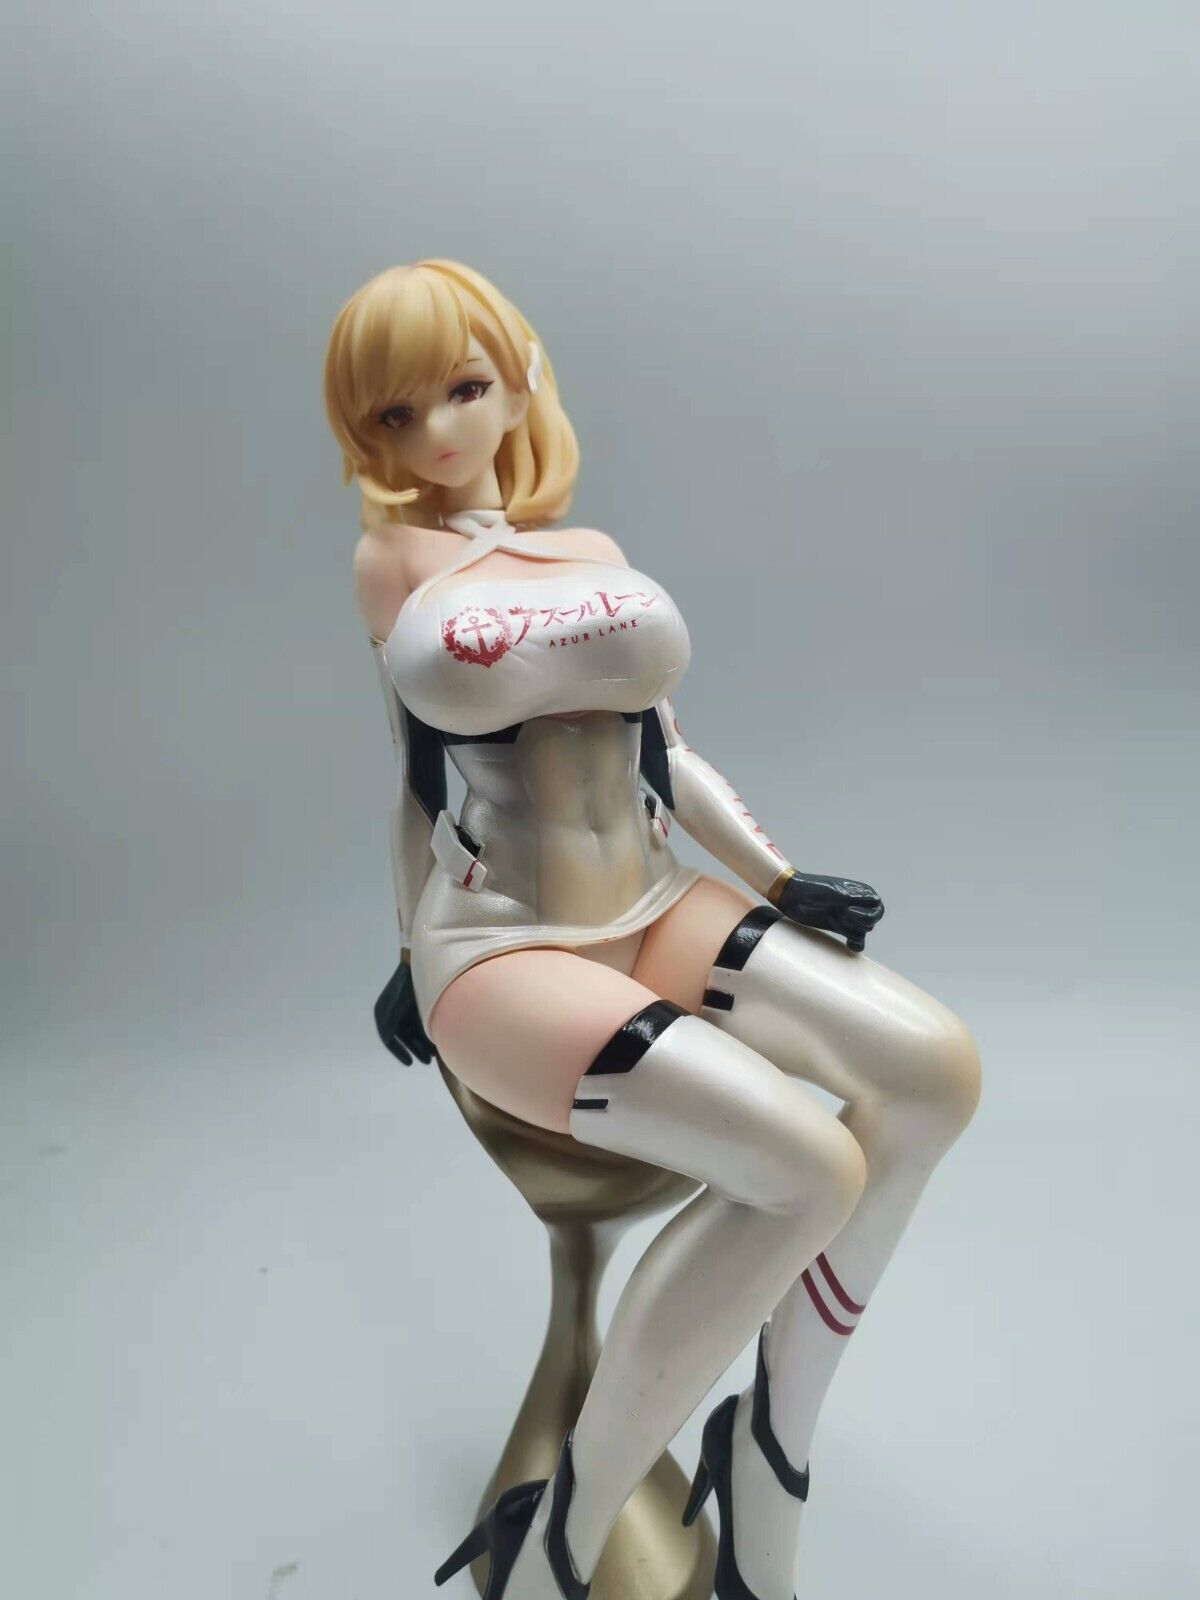 New  1/6 25CM Girl Anime Figures Collect PVC toy Gift removable Parts